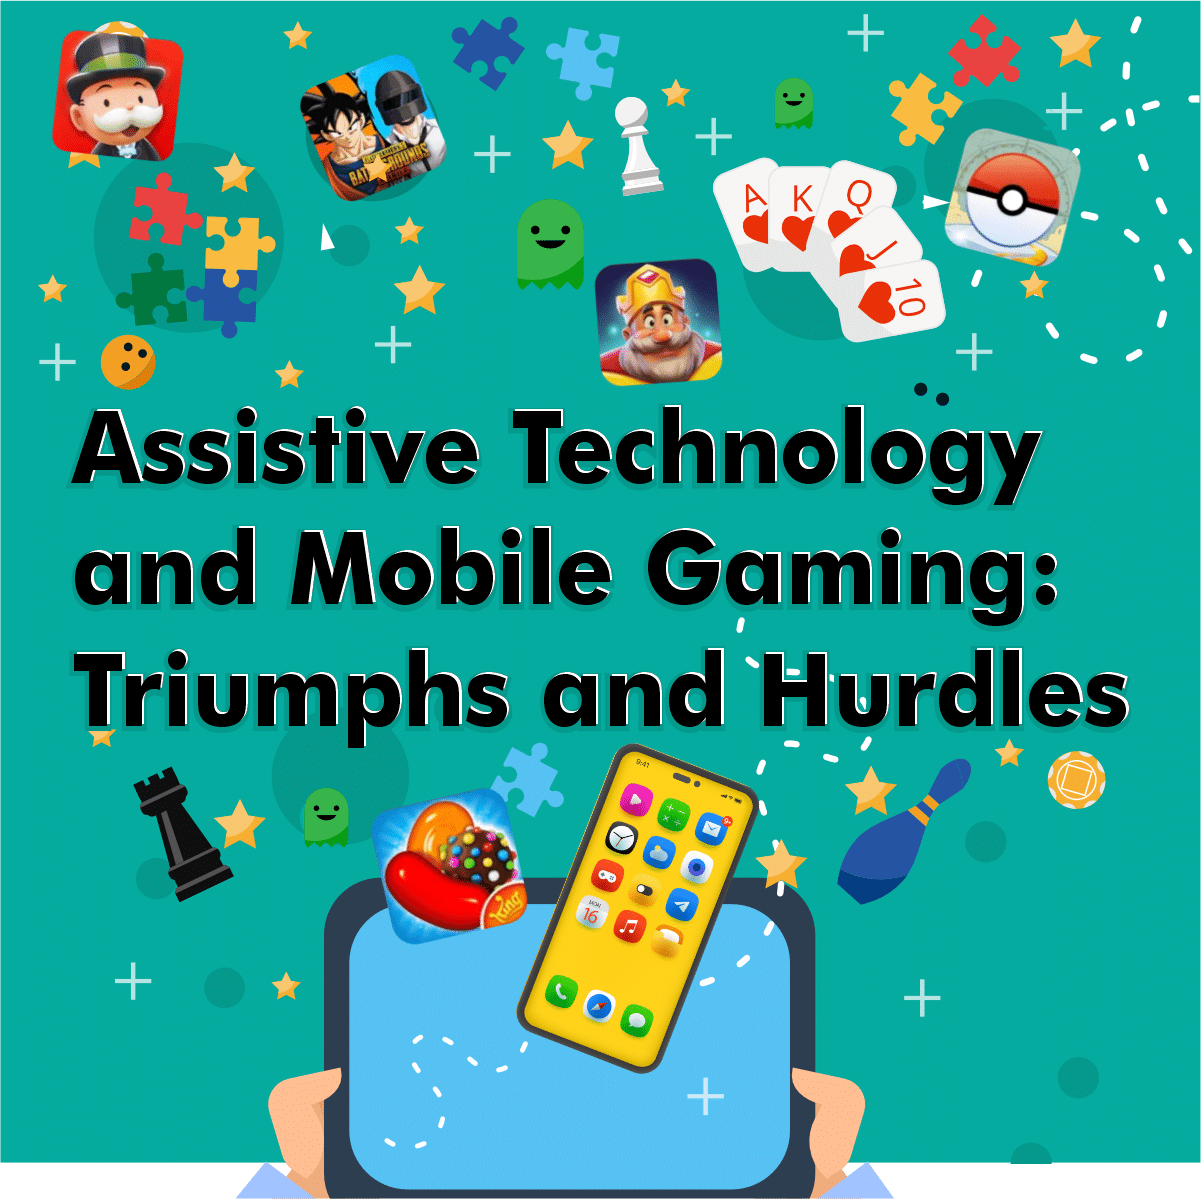 a cartoon style graphic with puzzle pieces, chess pieces, playing cards, mobile app icons, two hands holding a tablet